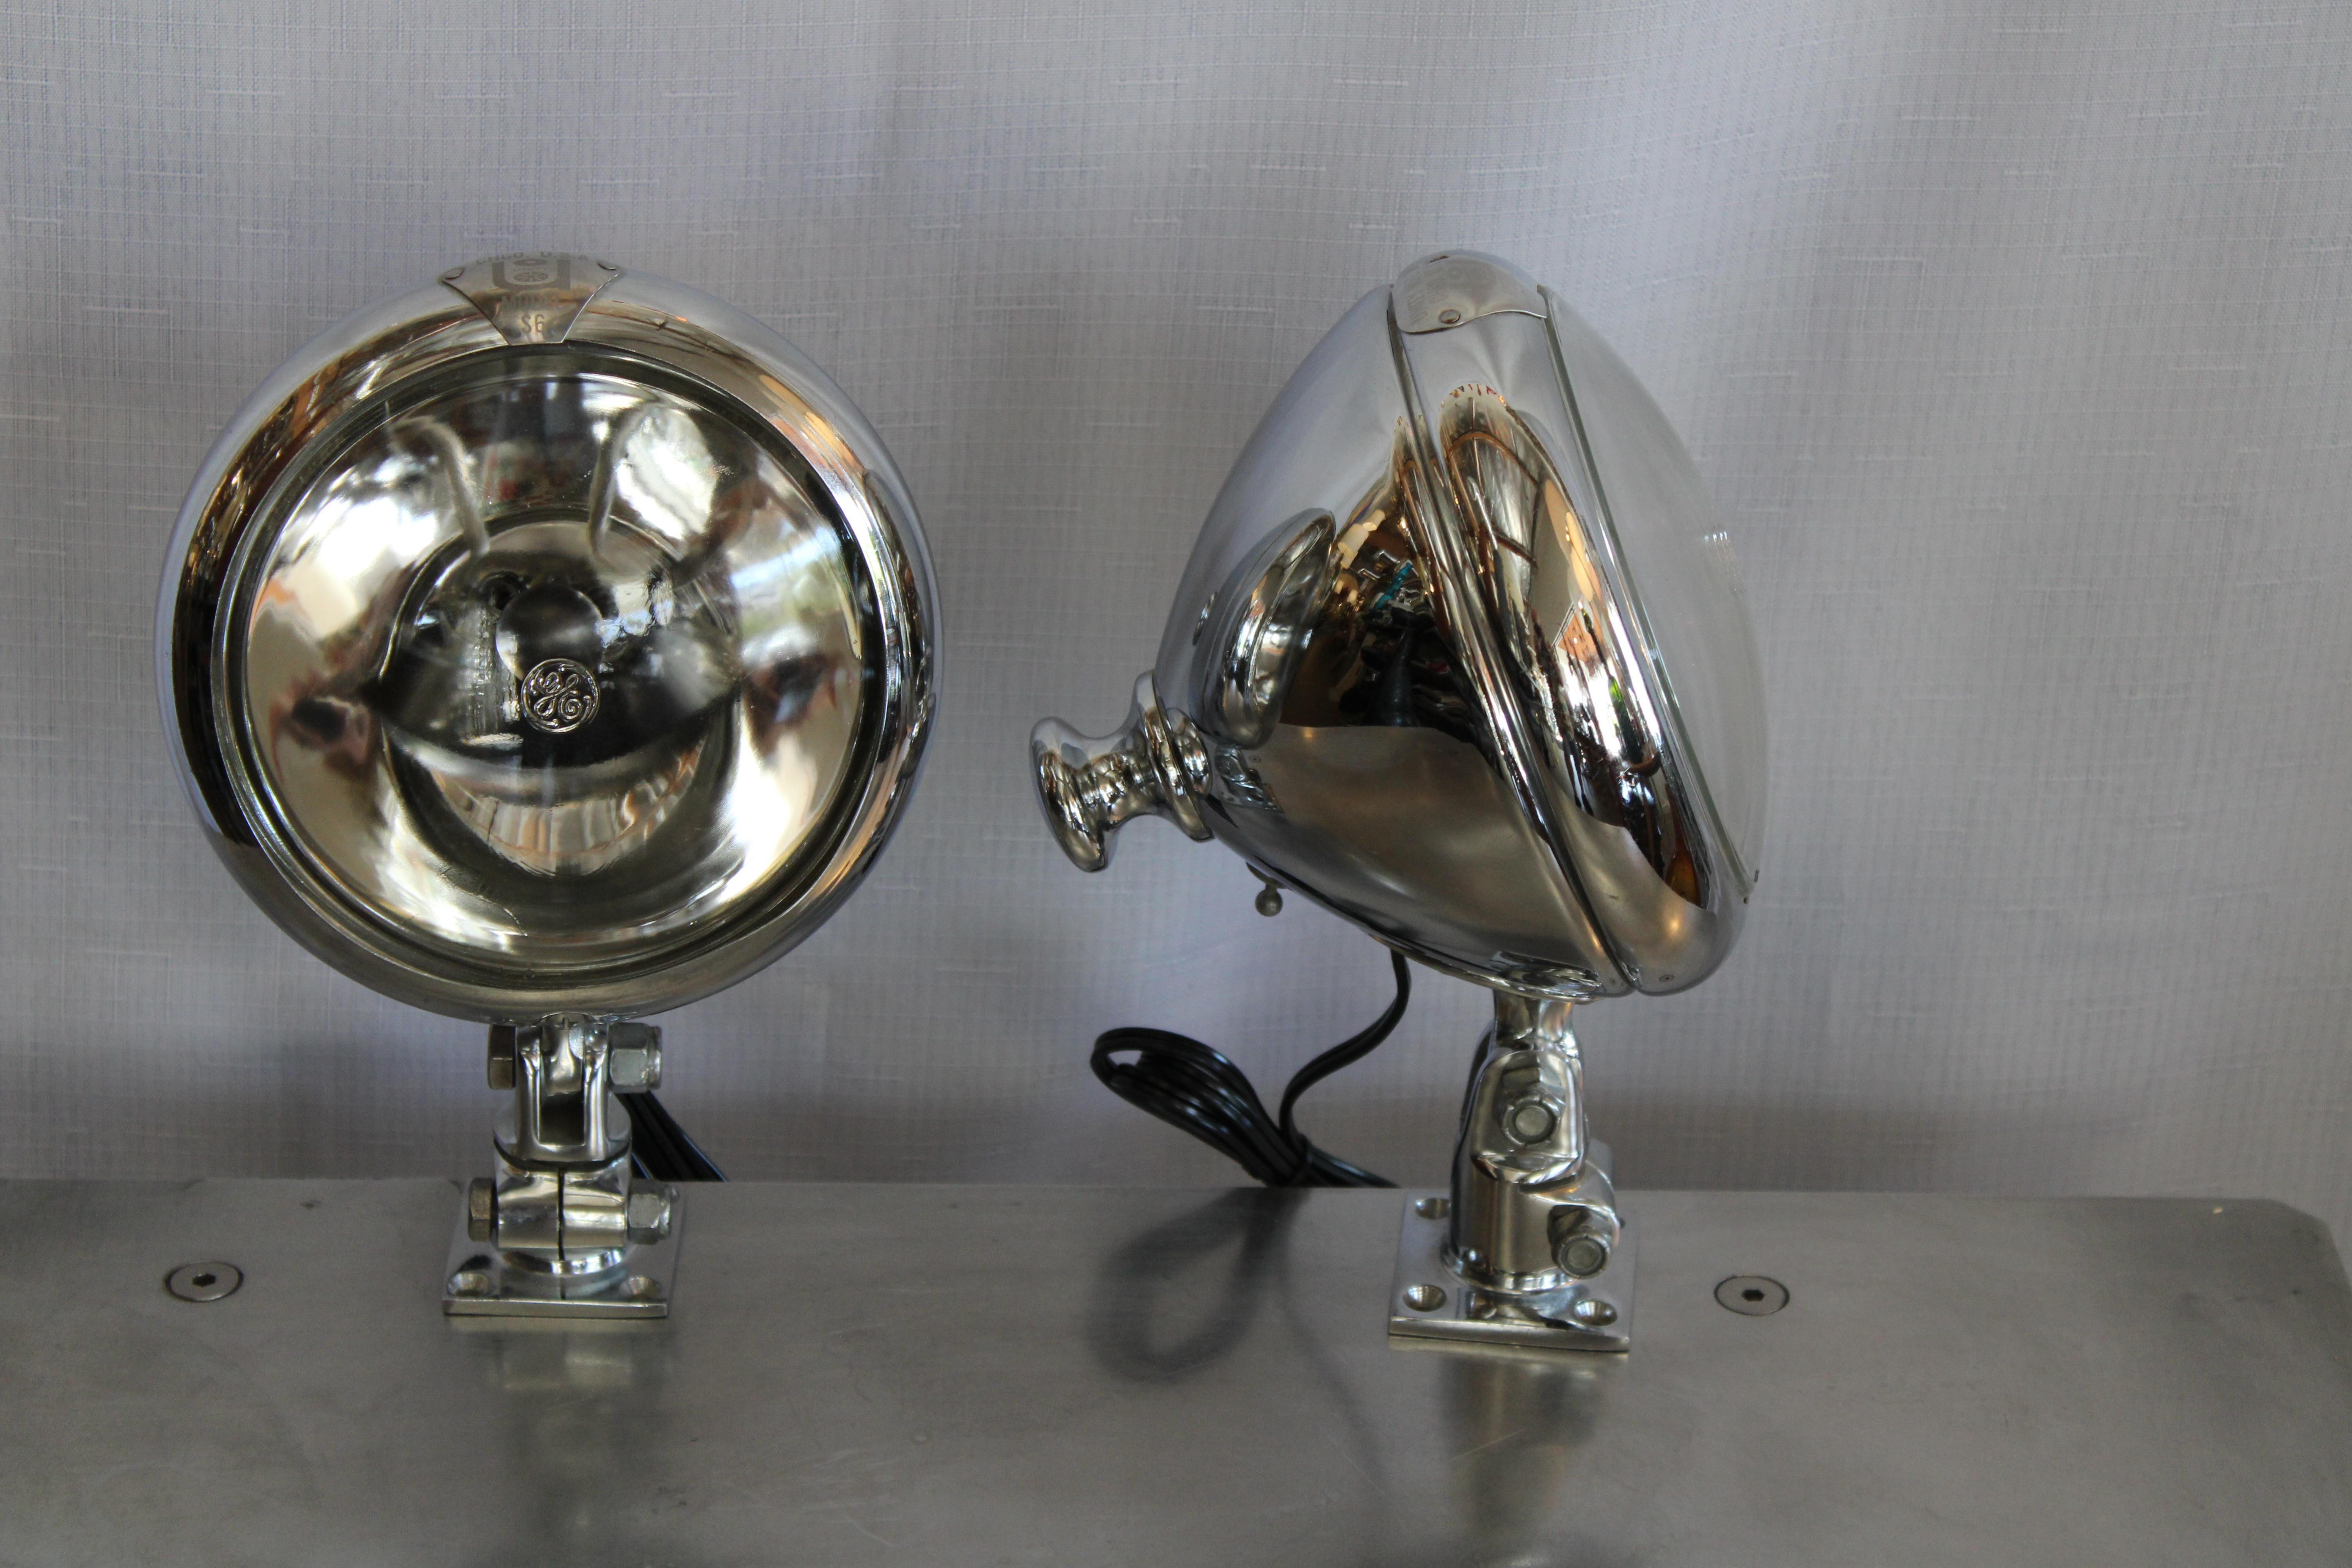 Great pair of vintage automobile style spotlights. Manufactured by Unity Manufacturing of Chicago IL. These were used mostly on Fire Trucks as their model (number S6) indicates. Iconic look where each lamp swivels and tilts on its solid base. Each